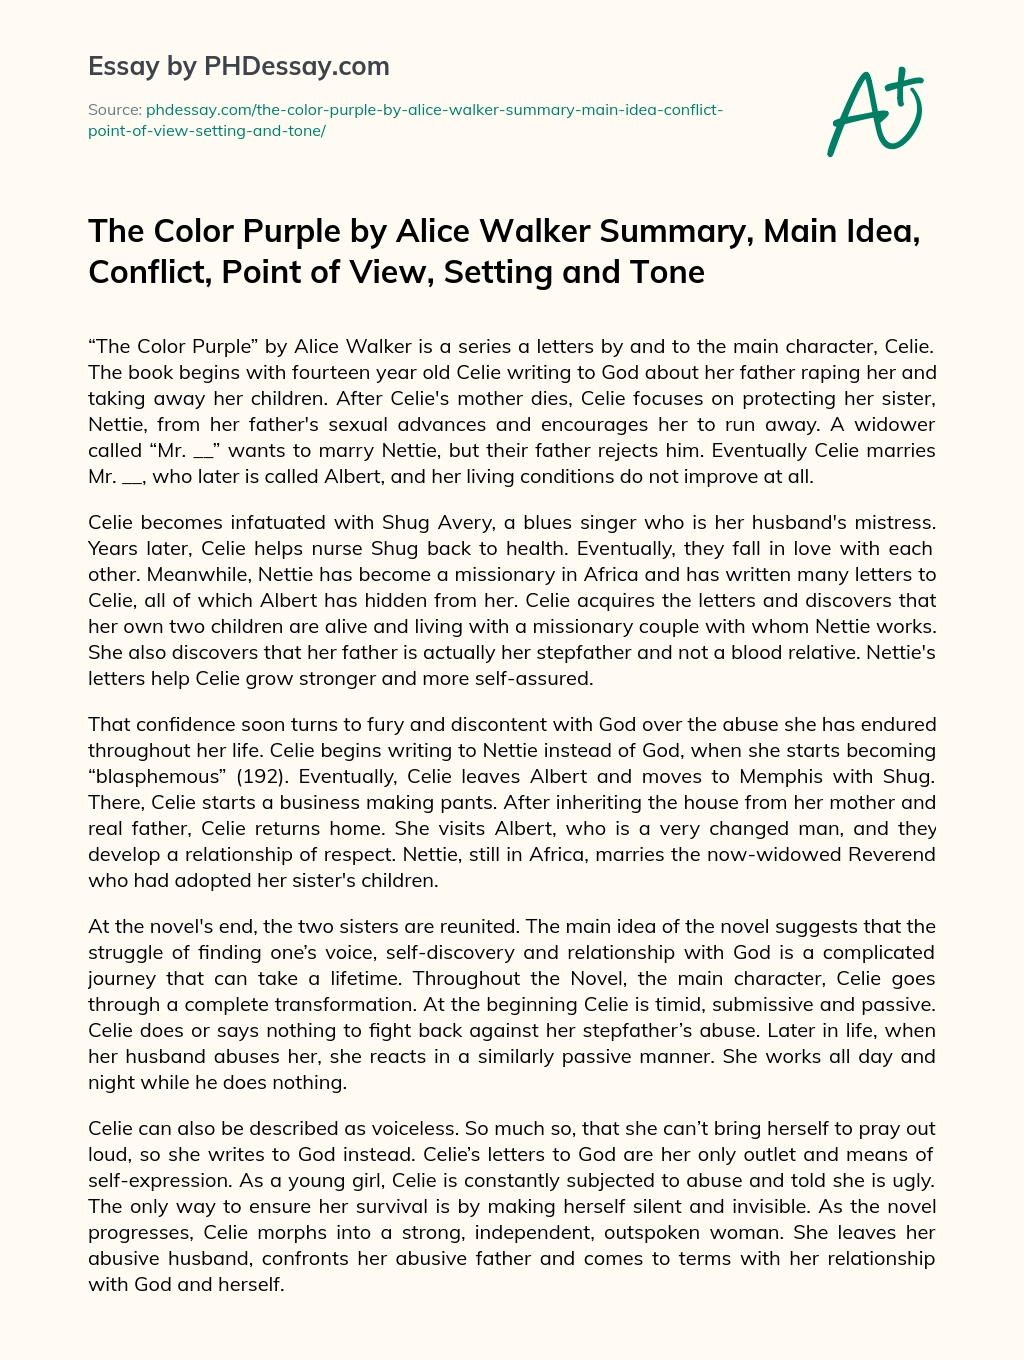 The Color Purple by Alice Walker Summary, Main Idea, Conflict, Point of View, Setting and Tone essay